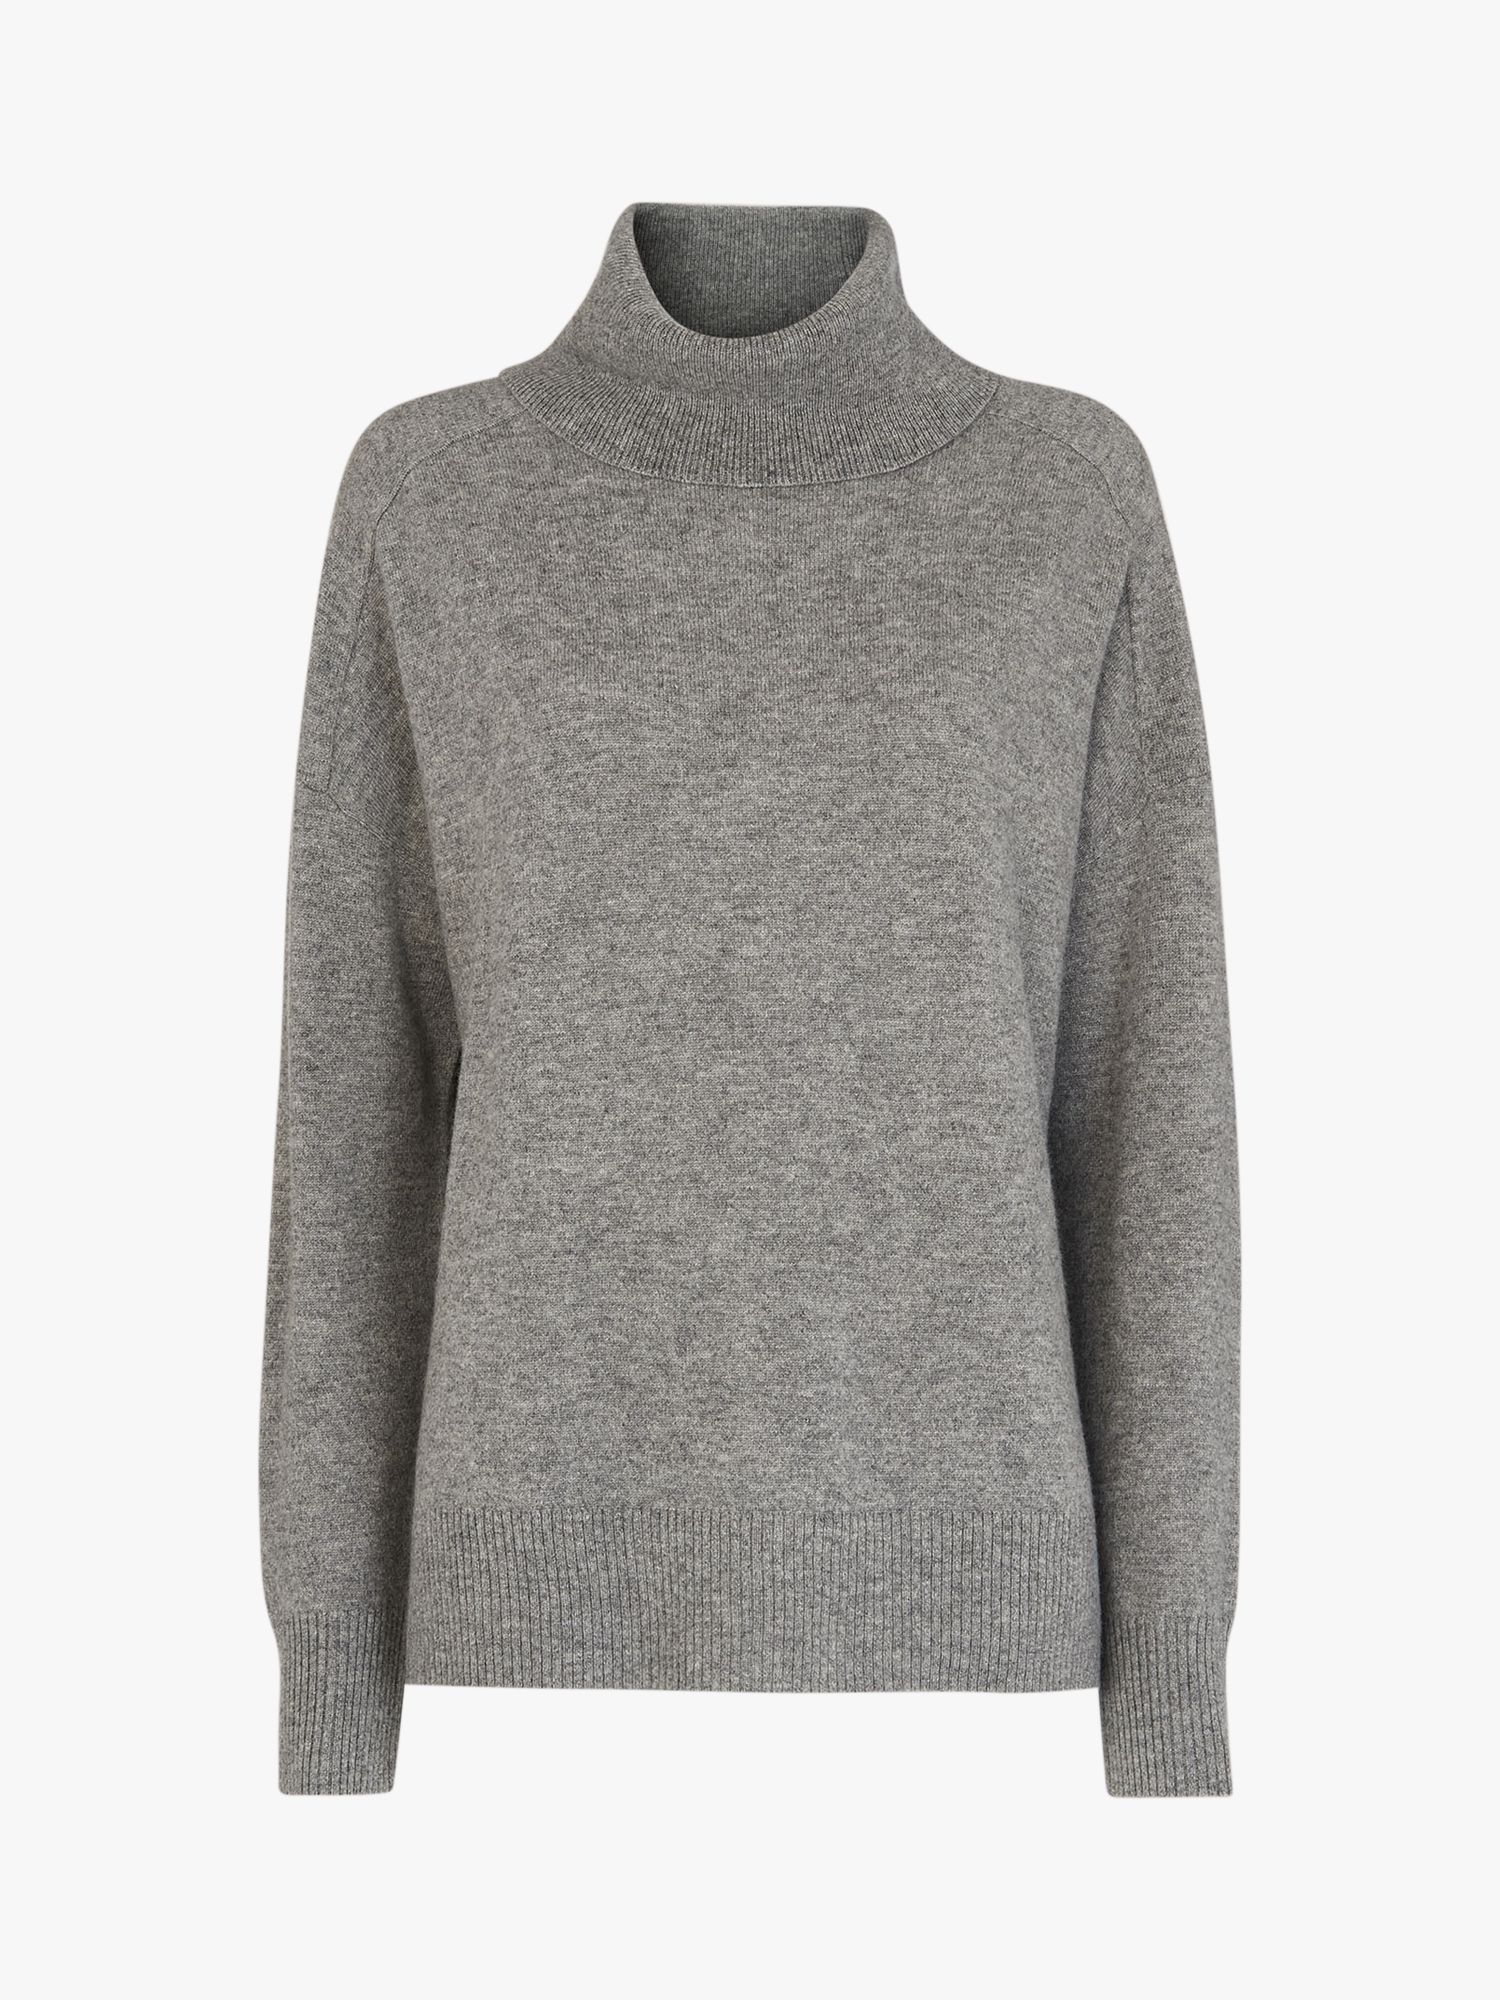 Whistles Cashmere Roll Neck Jumper, Mid Grey at John Lewis & Partners